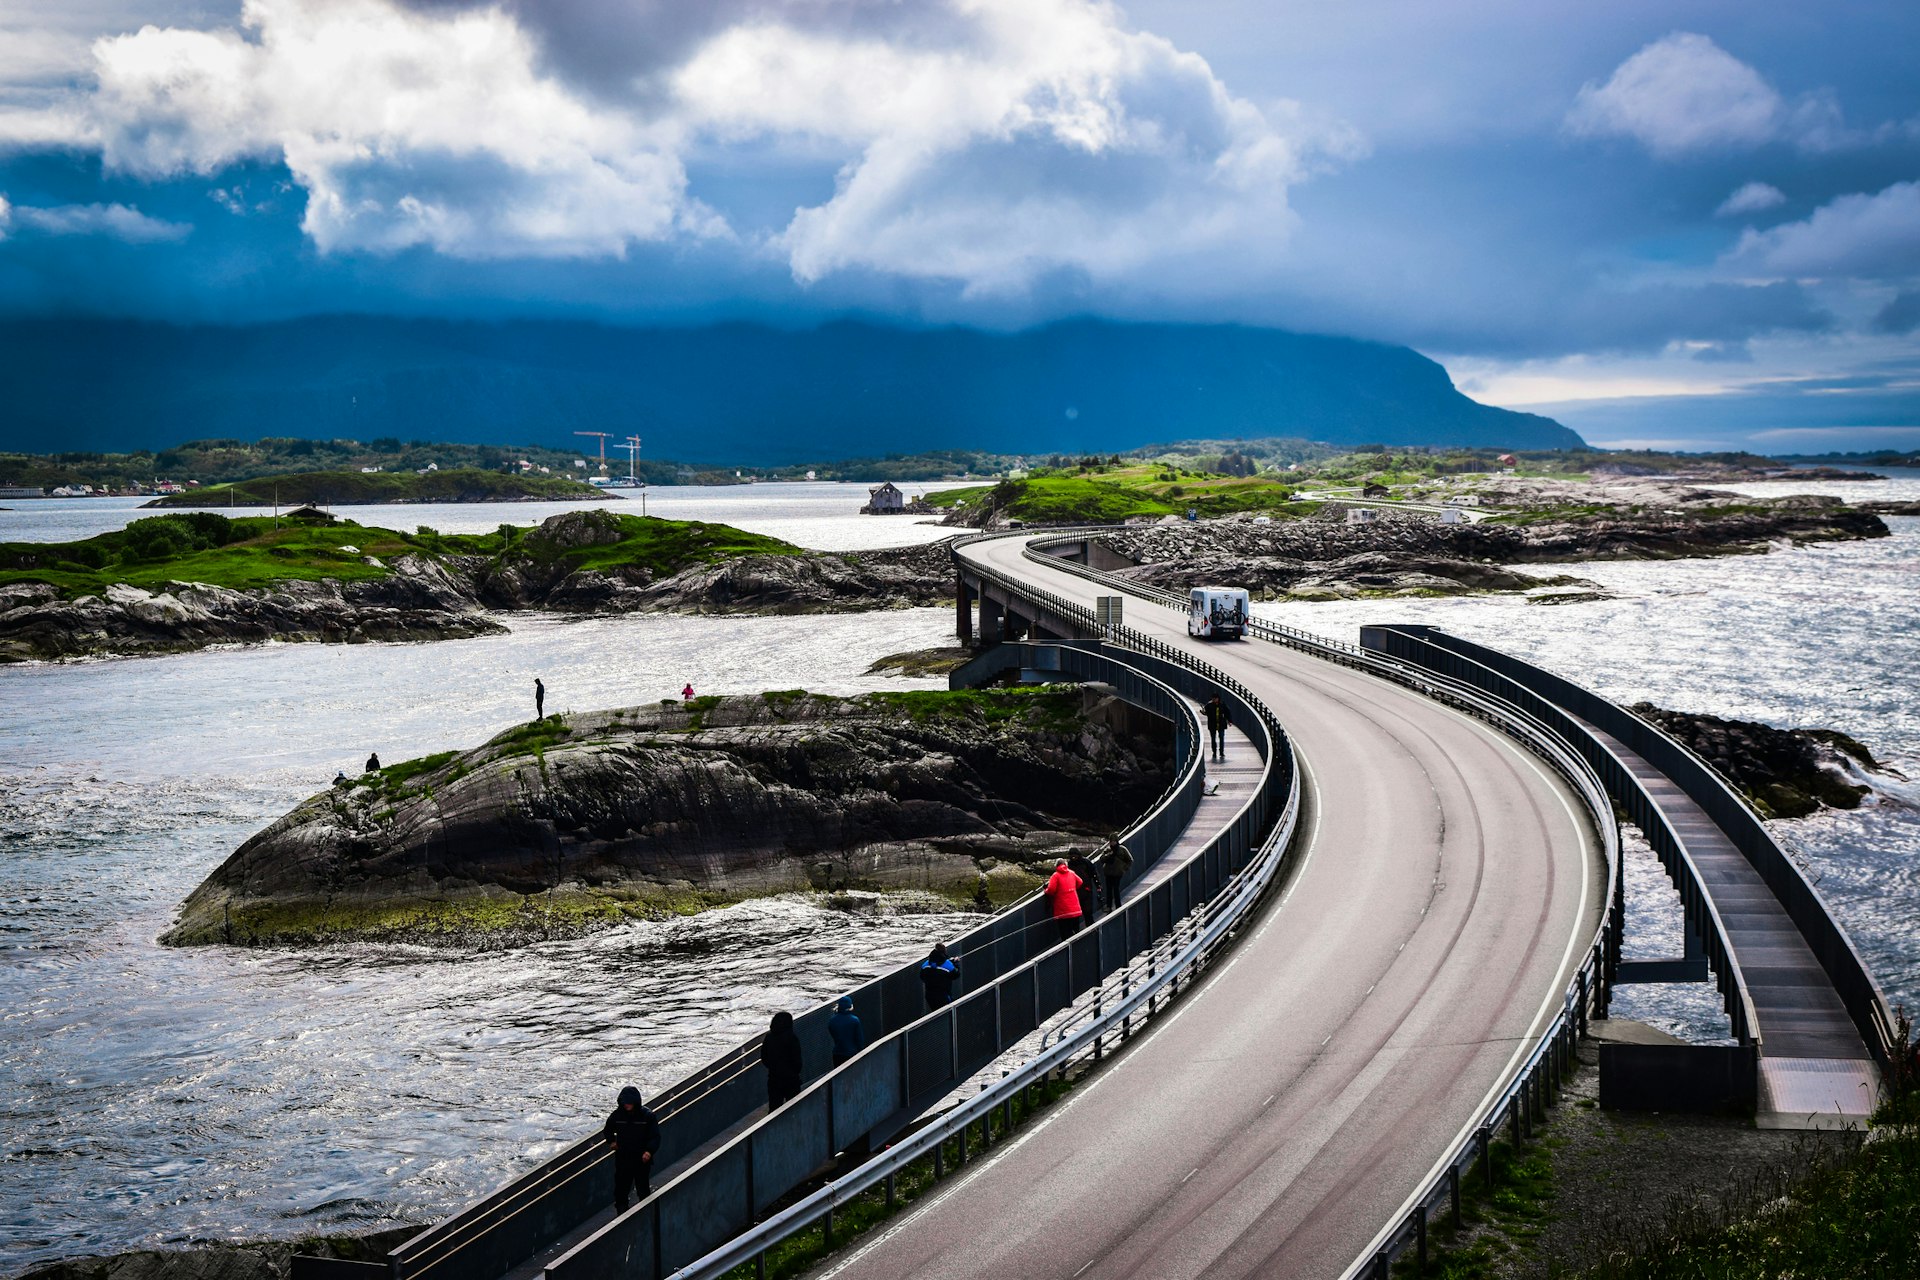 A camper van drives along a road bridge connecting islands in wet weather conditions